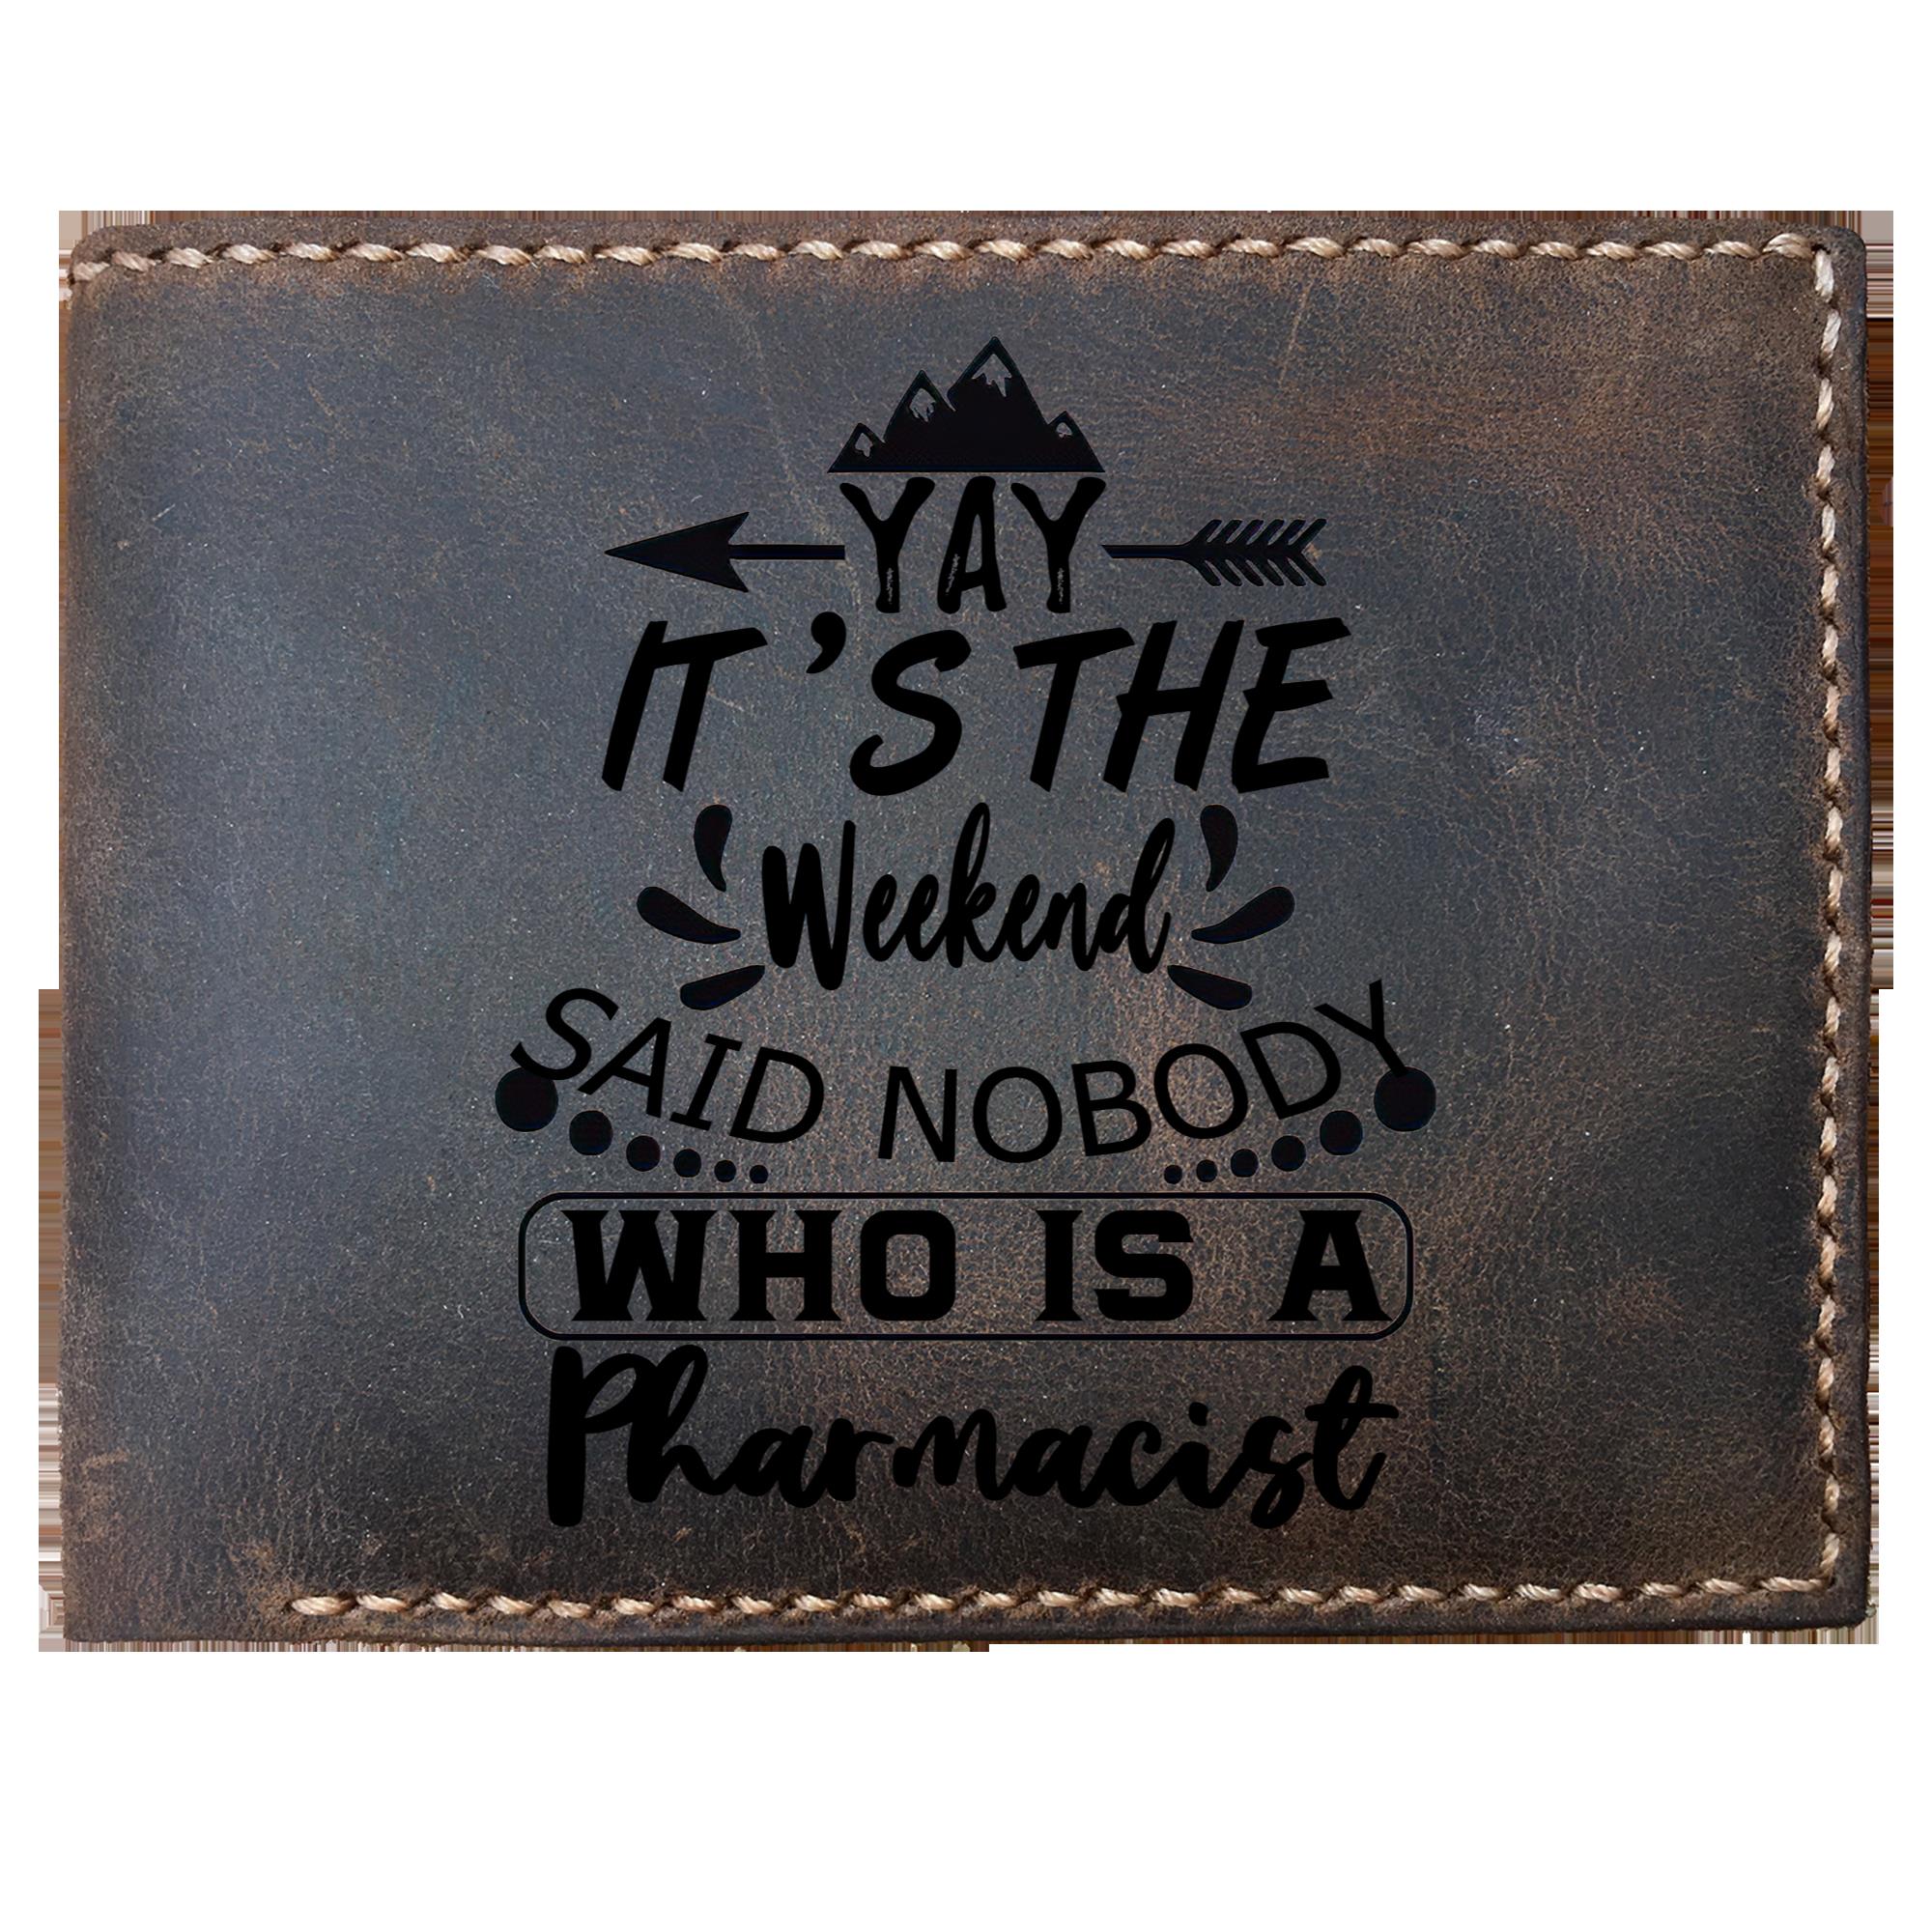 Skitongifts Funny Custom Laser Engraved Bifold Leather Wallet For Men, It's The Weekend Said Nobody Who Is A Pharmacist, Father's Day Gifts